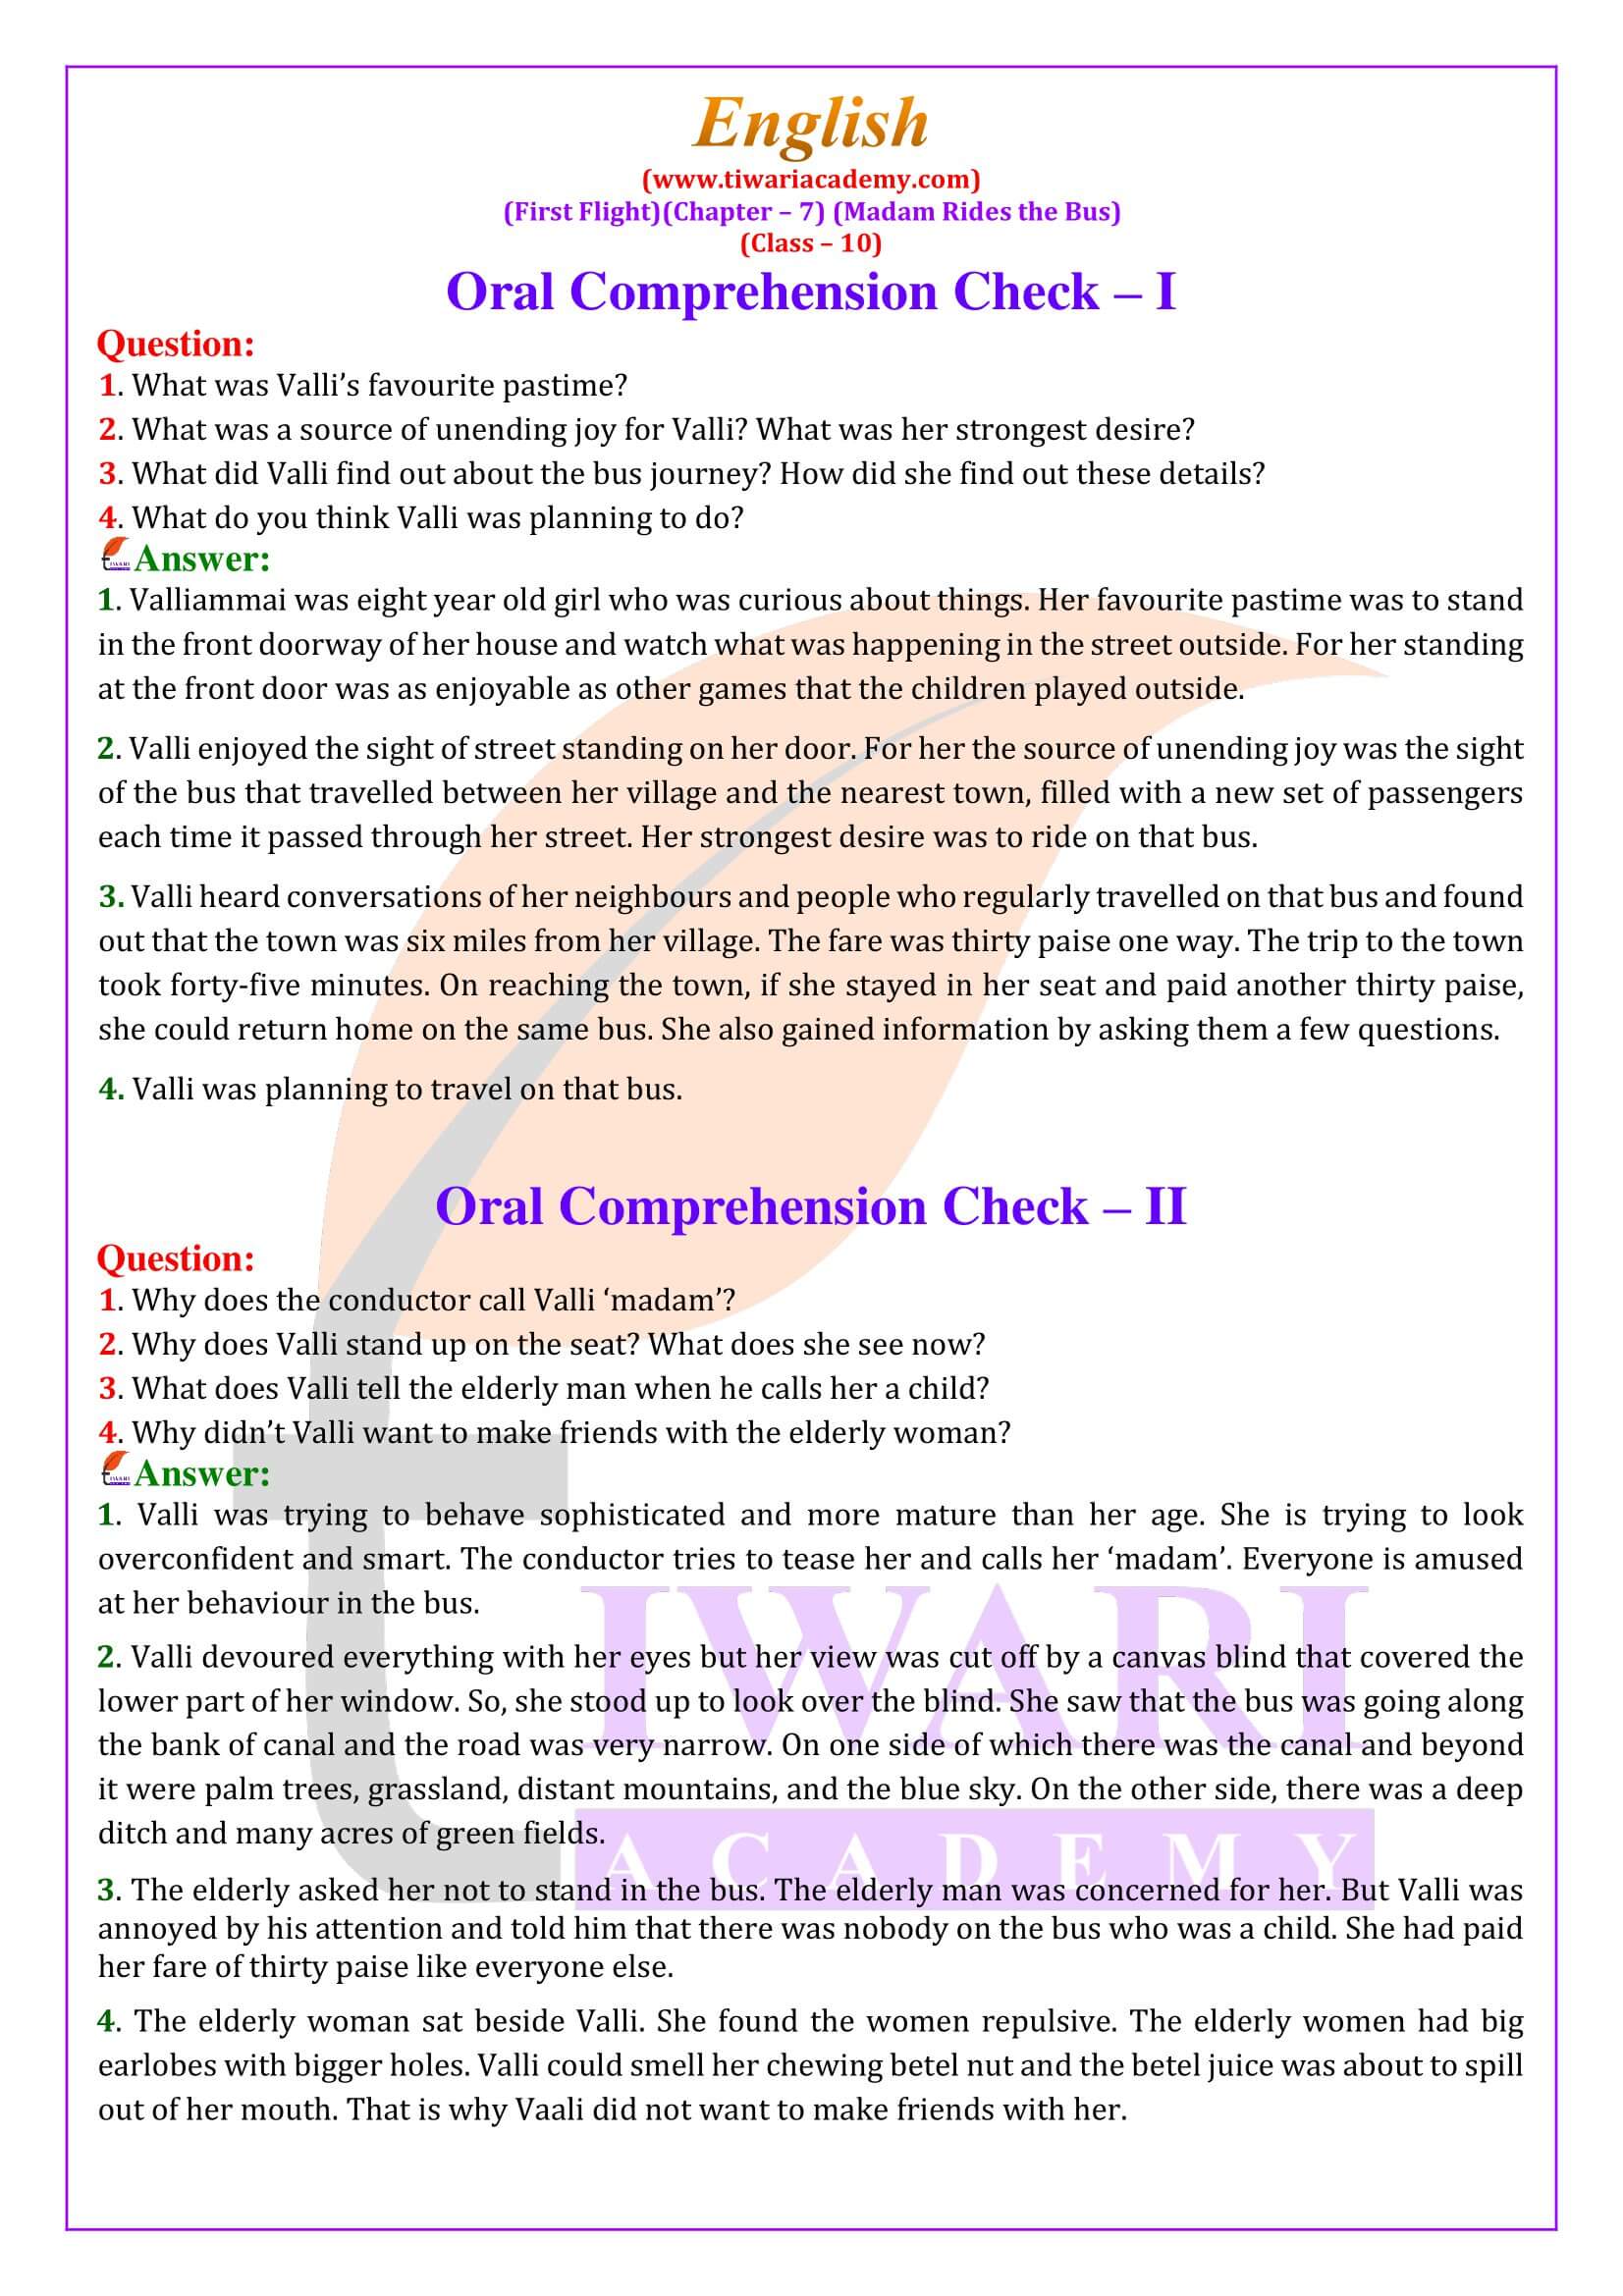 NCERT Solutions for Class 10 English First Flight Chapter 7 Madam Rides the Bus